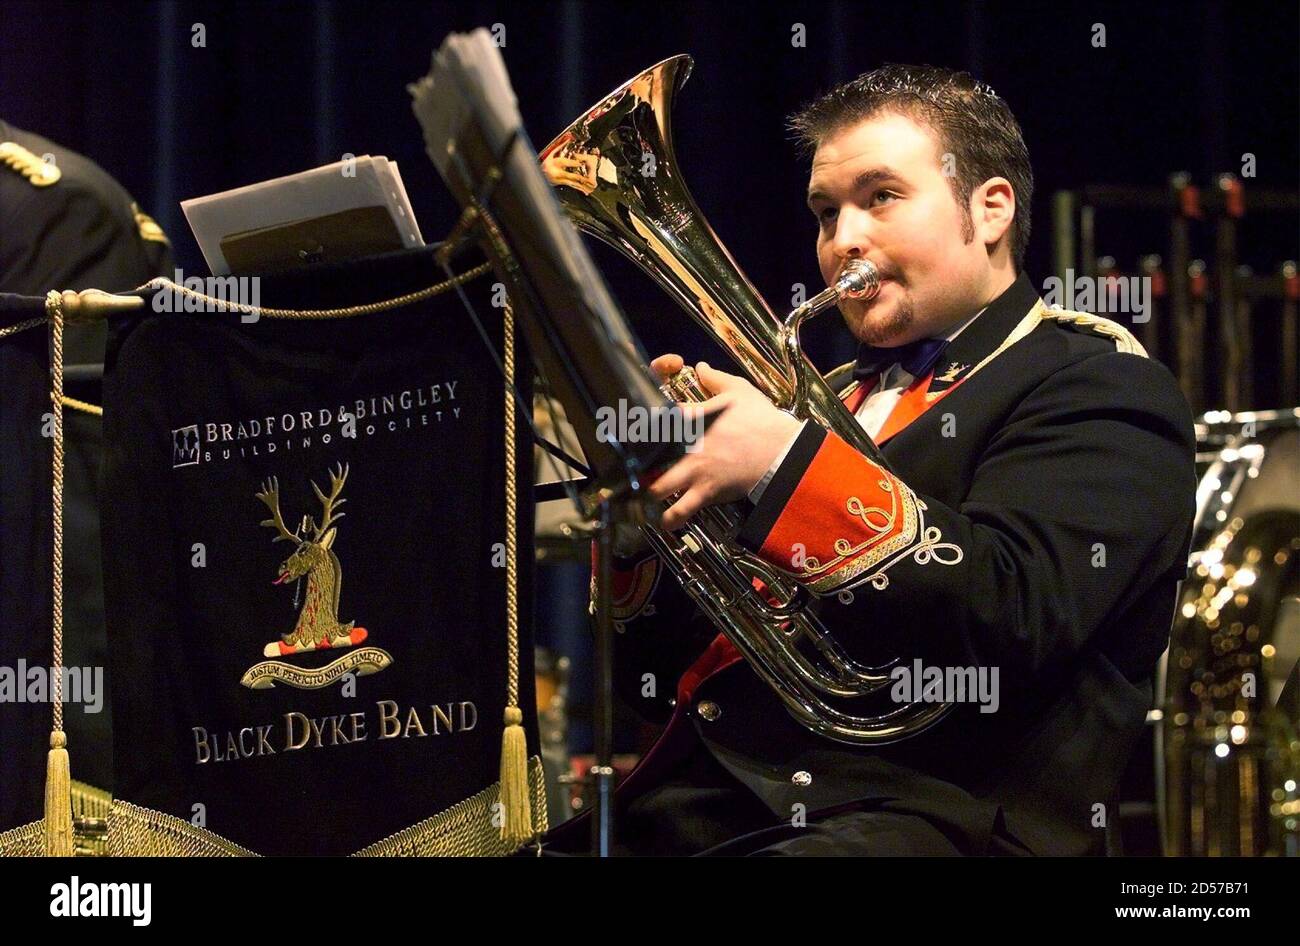 Matthew Van Emmrick of the Black Dyke Band practices before a performance  at The Royal Hall in Harrogate March 6. The band have been asked to play at  the Oscars, however they